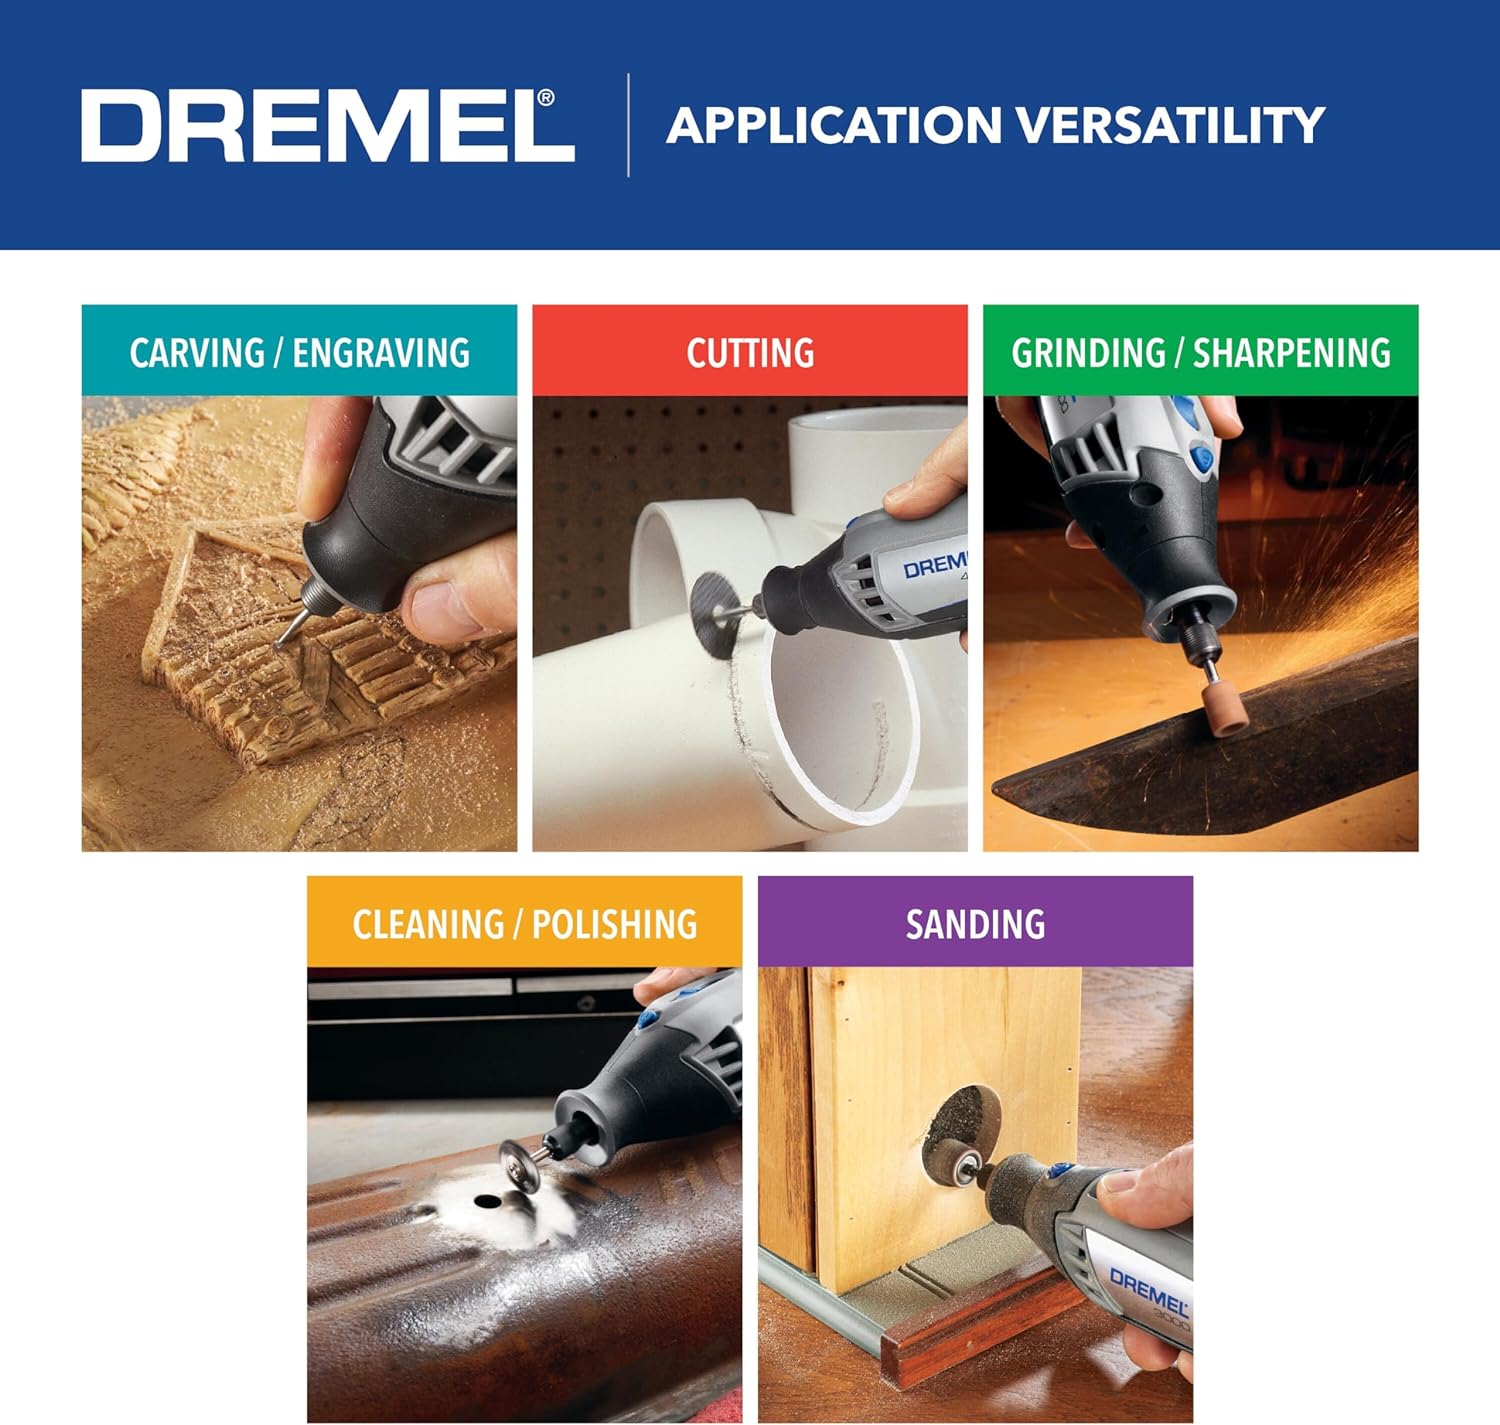 Dremel 4000-2/30 Variable Speed Rotary Tool Kit - Engraver, Polisher, And Sander- Perfect For Cutting, Detail Sanding, Engraving, Wood Carving, And Polishing- 2 Attachments  30 Accessories